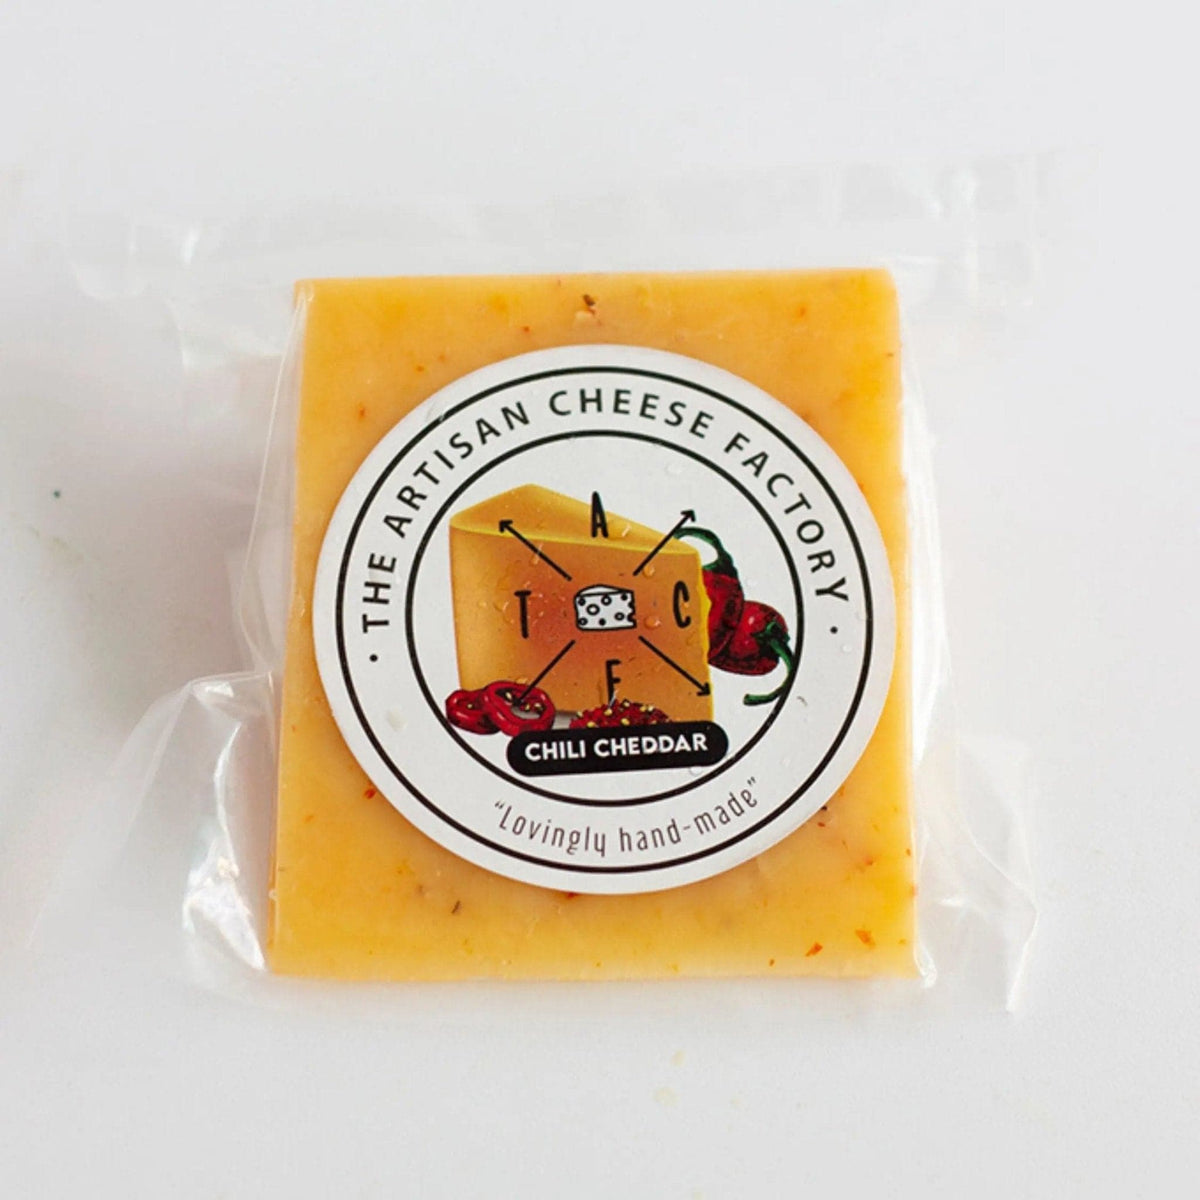 Chili Cheddar - Artisan Cheese Factory